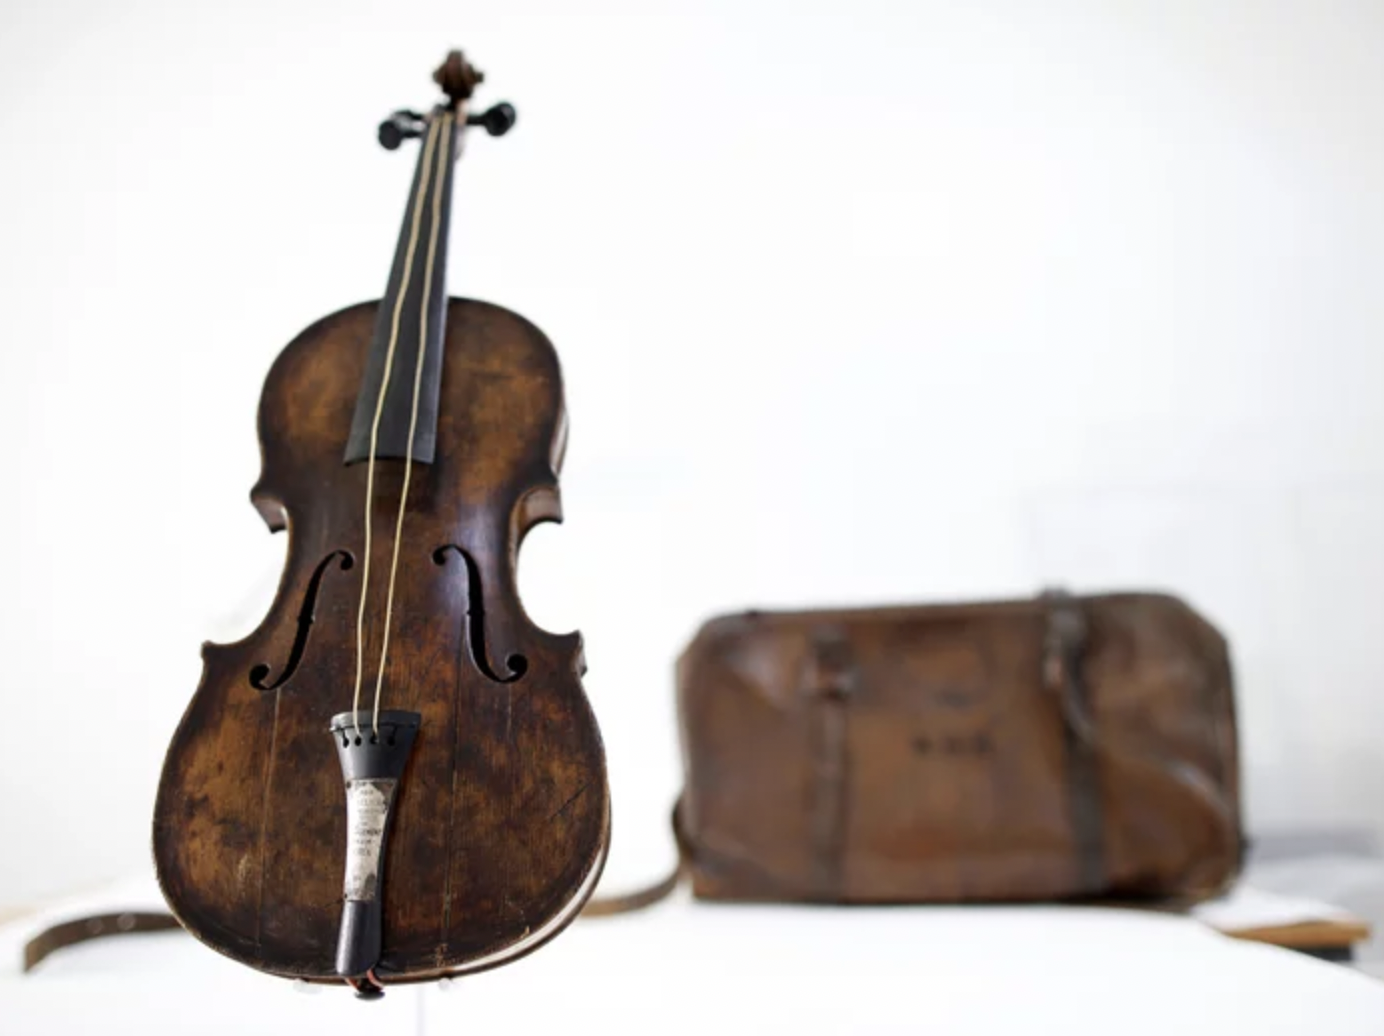 This looks like a stock photo of a violin. The instrument in that picture is the Hartley Violin. It was owned by Wallace Hartley, the bandmaster and lead violinist on the Titanic. It was the one he carried with him on the night the ship sank. Survivors reported seeing Hartley and his band on the deck of the ship during the sinking, playing to calm passengers as they boarded the insufficient lifeboats. This is the exact instrument he played. We have his violin because at some unknown point before his death, Hartley tucked the violin back into its monogrammed case for safekeeping.